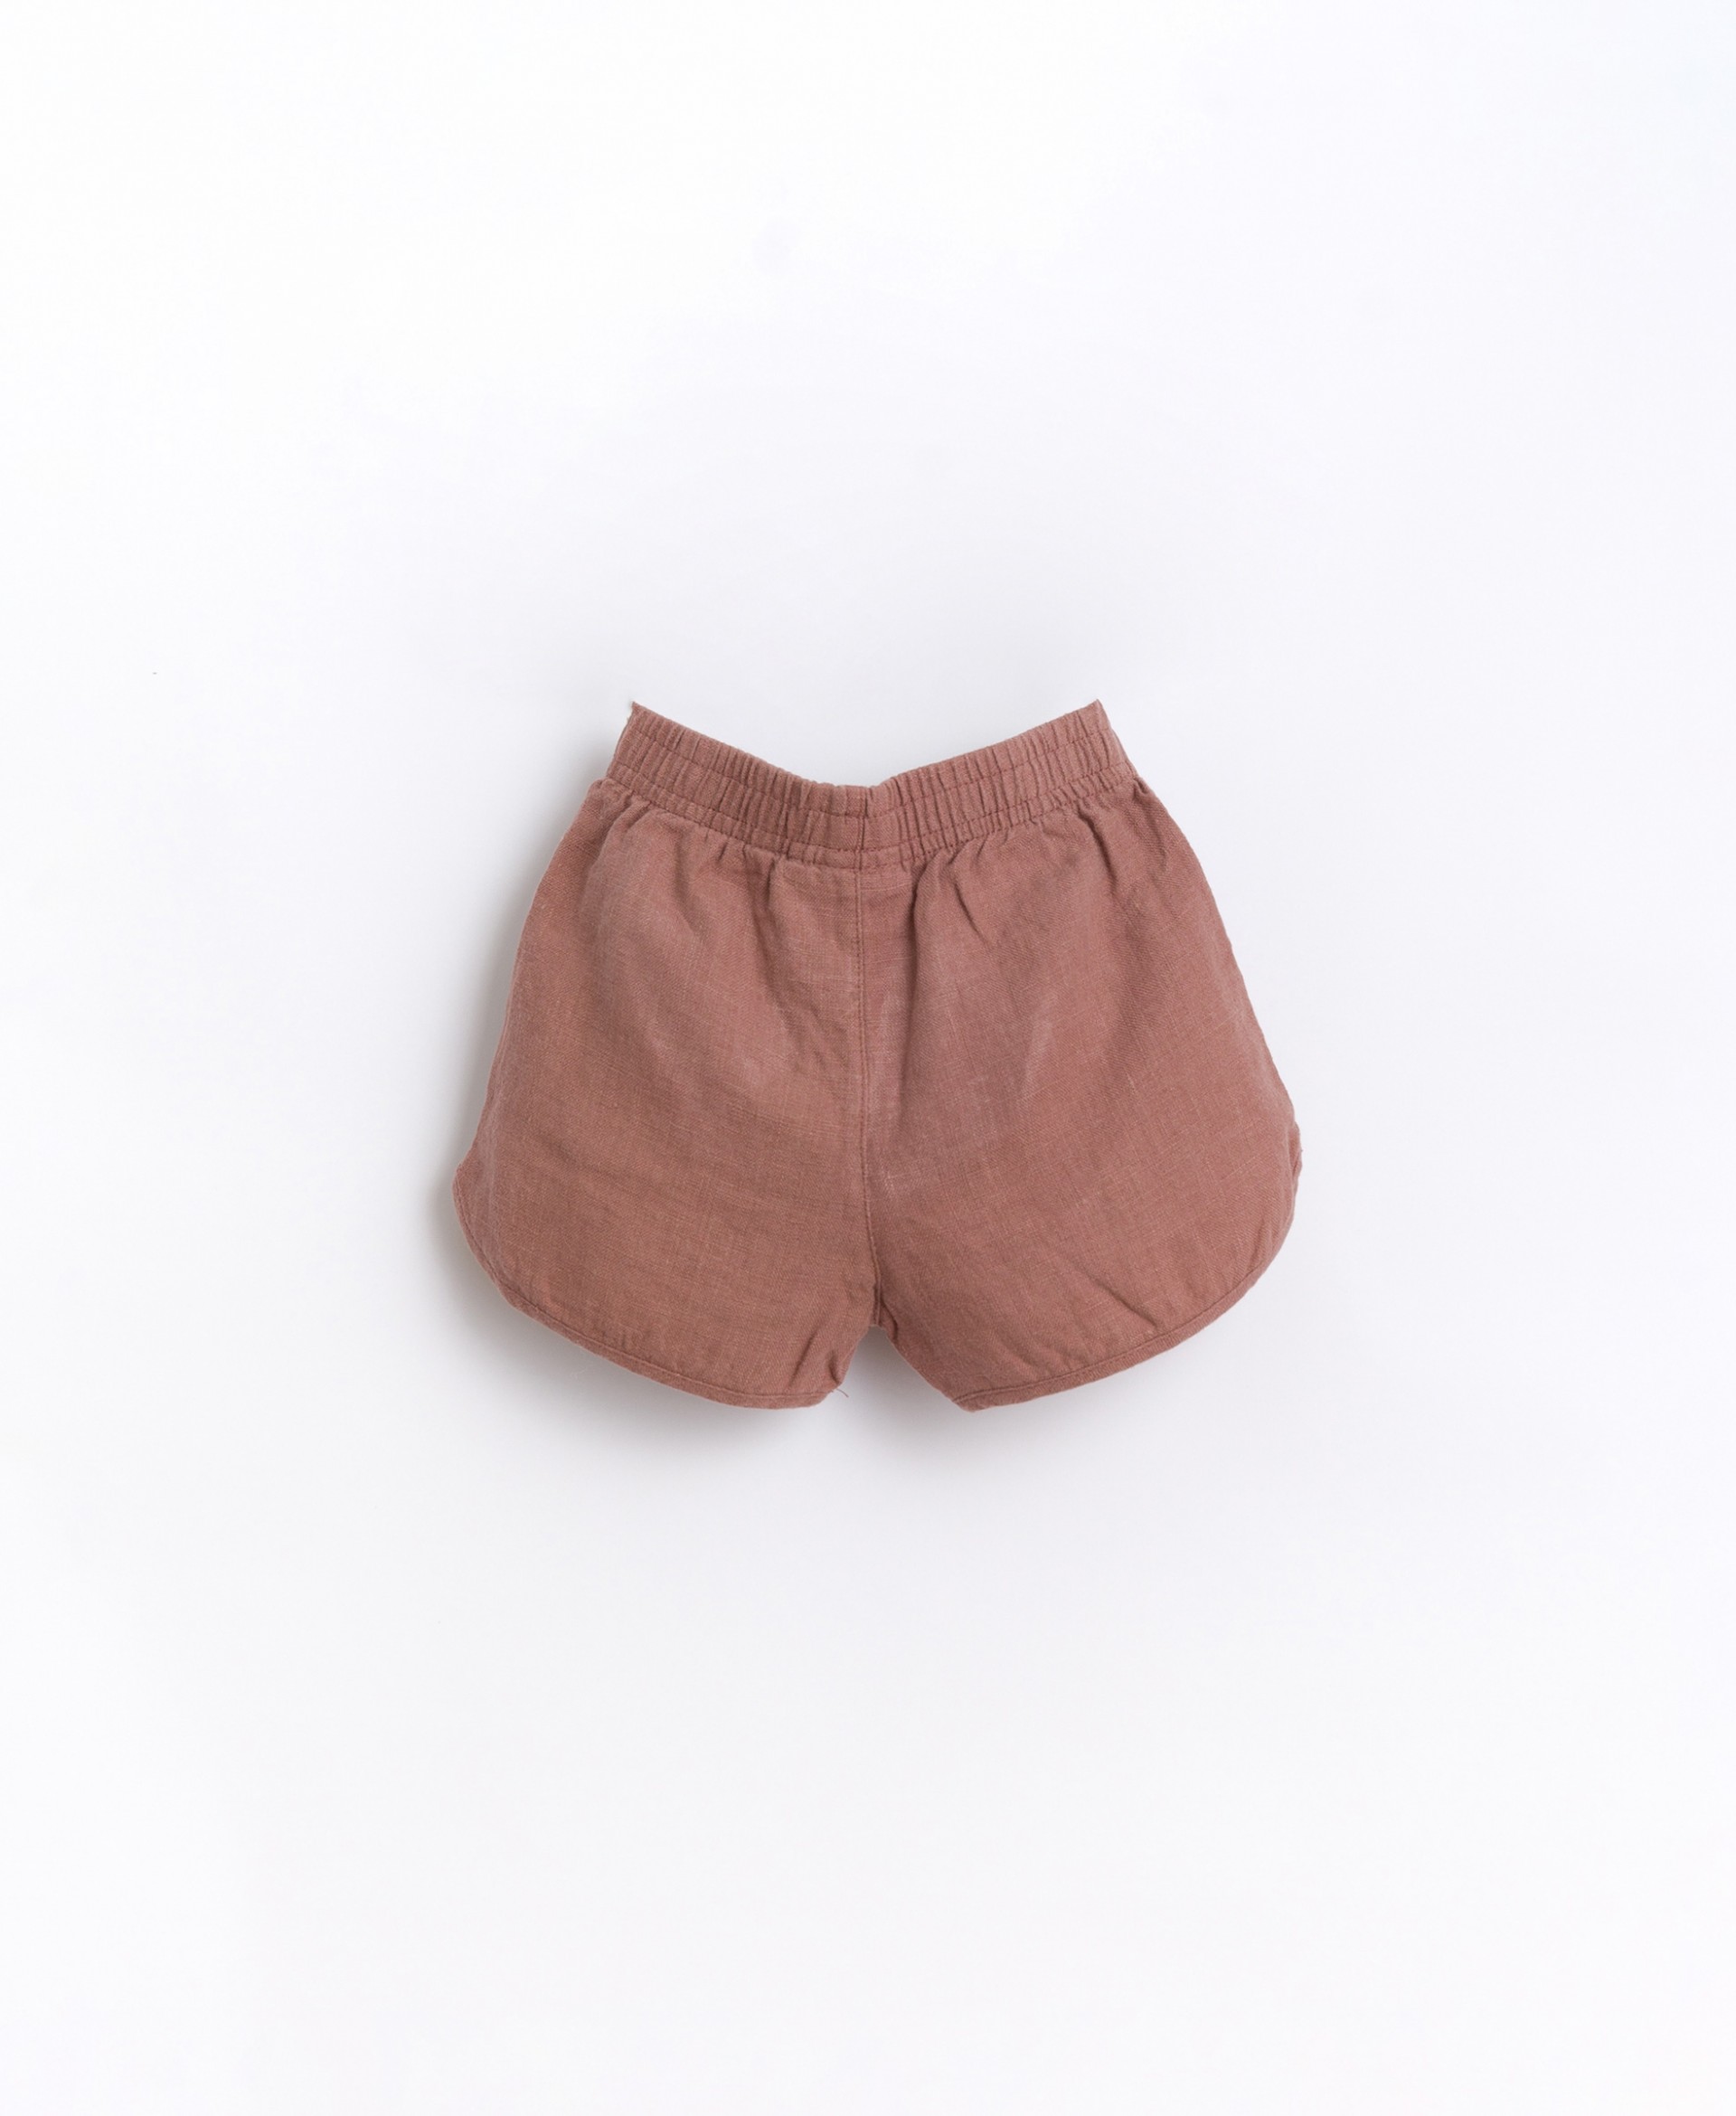 Linen shorts with decorative drawstring | Basketry